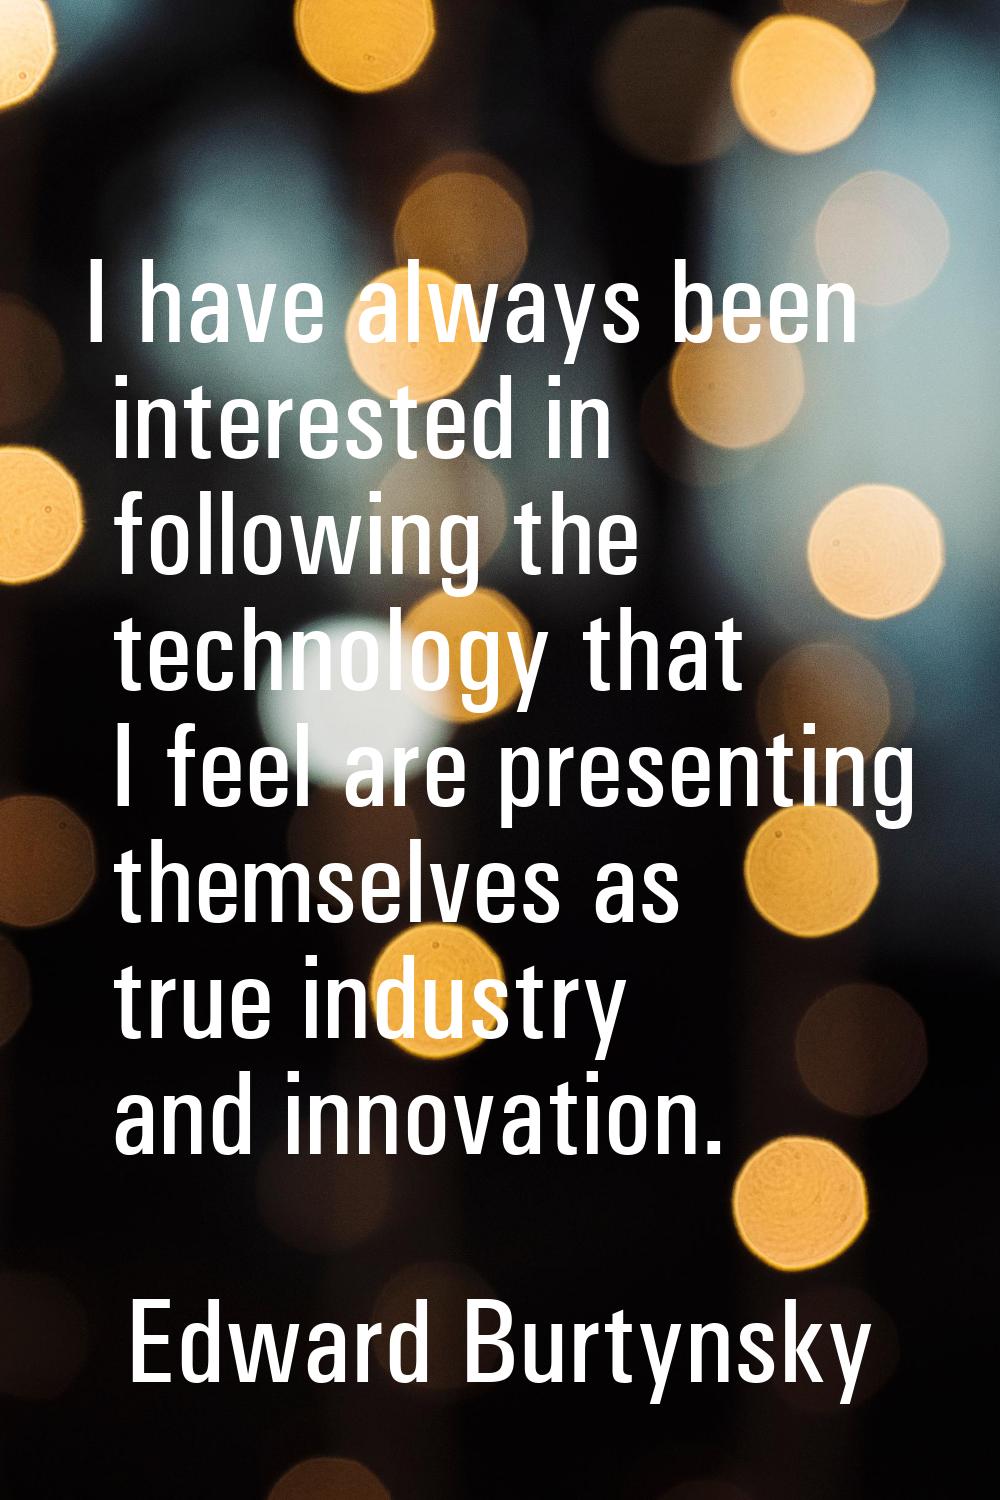 I have always been interested in following the technology that I feel are presenting themselves as 